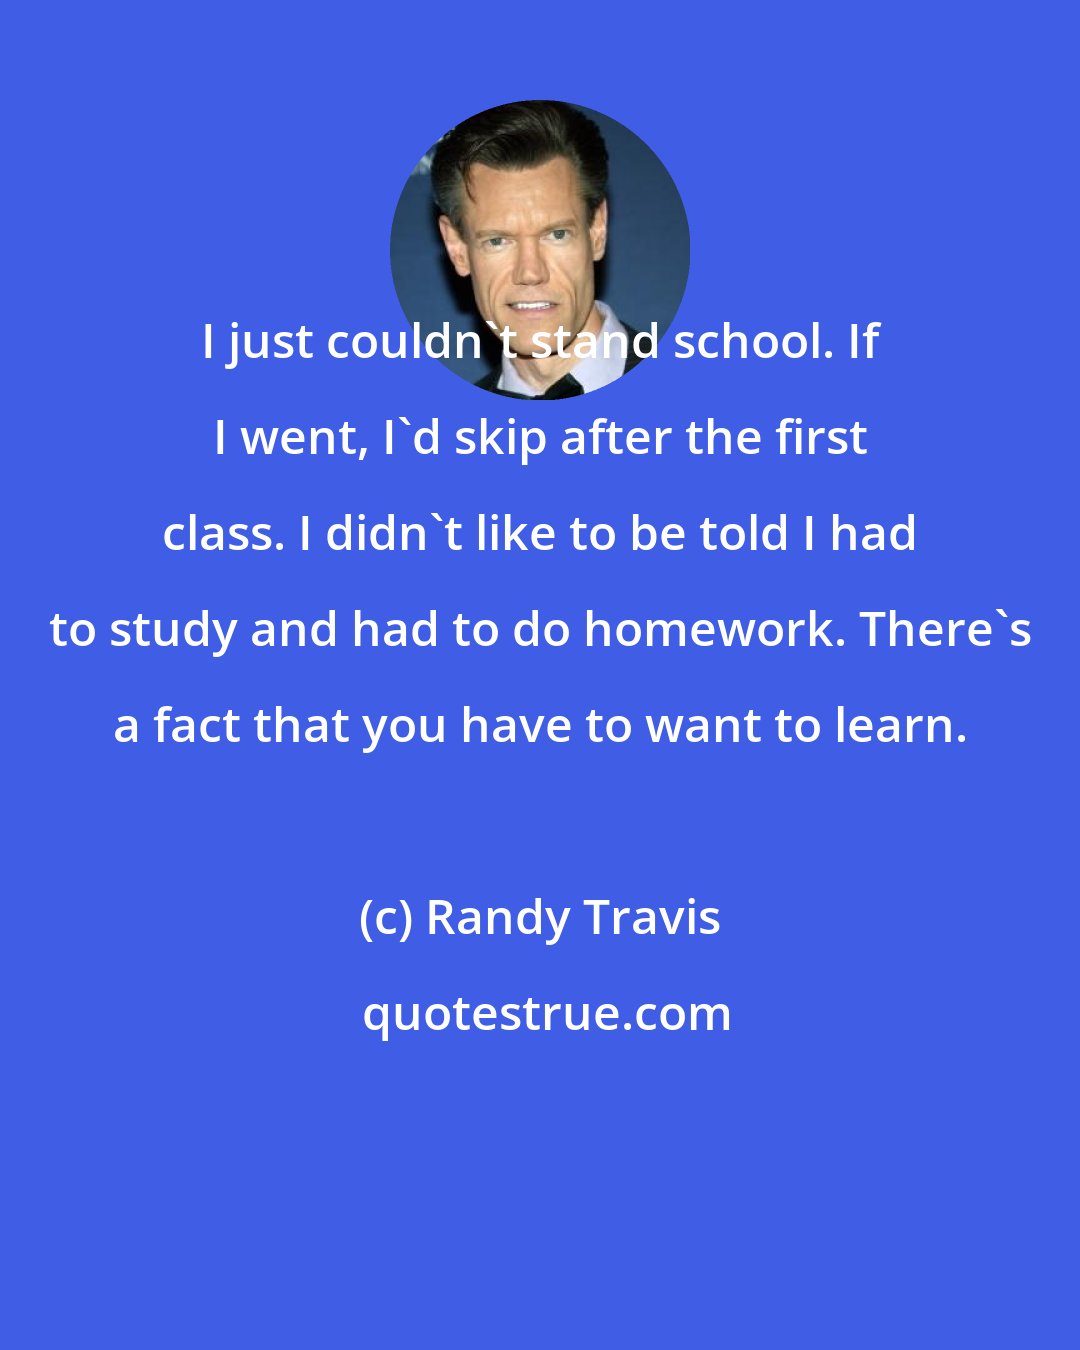 Randy Travis: I just couldn't stand school. If I went, I'd skip after the first class. I didn't like to be told I had to study and had to do homework. There's a fact that you have to want to learn.